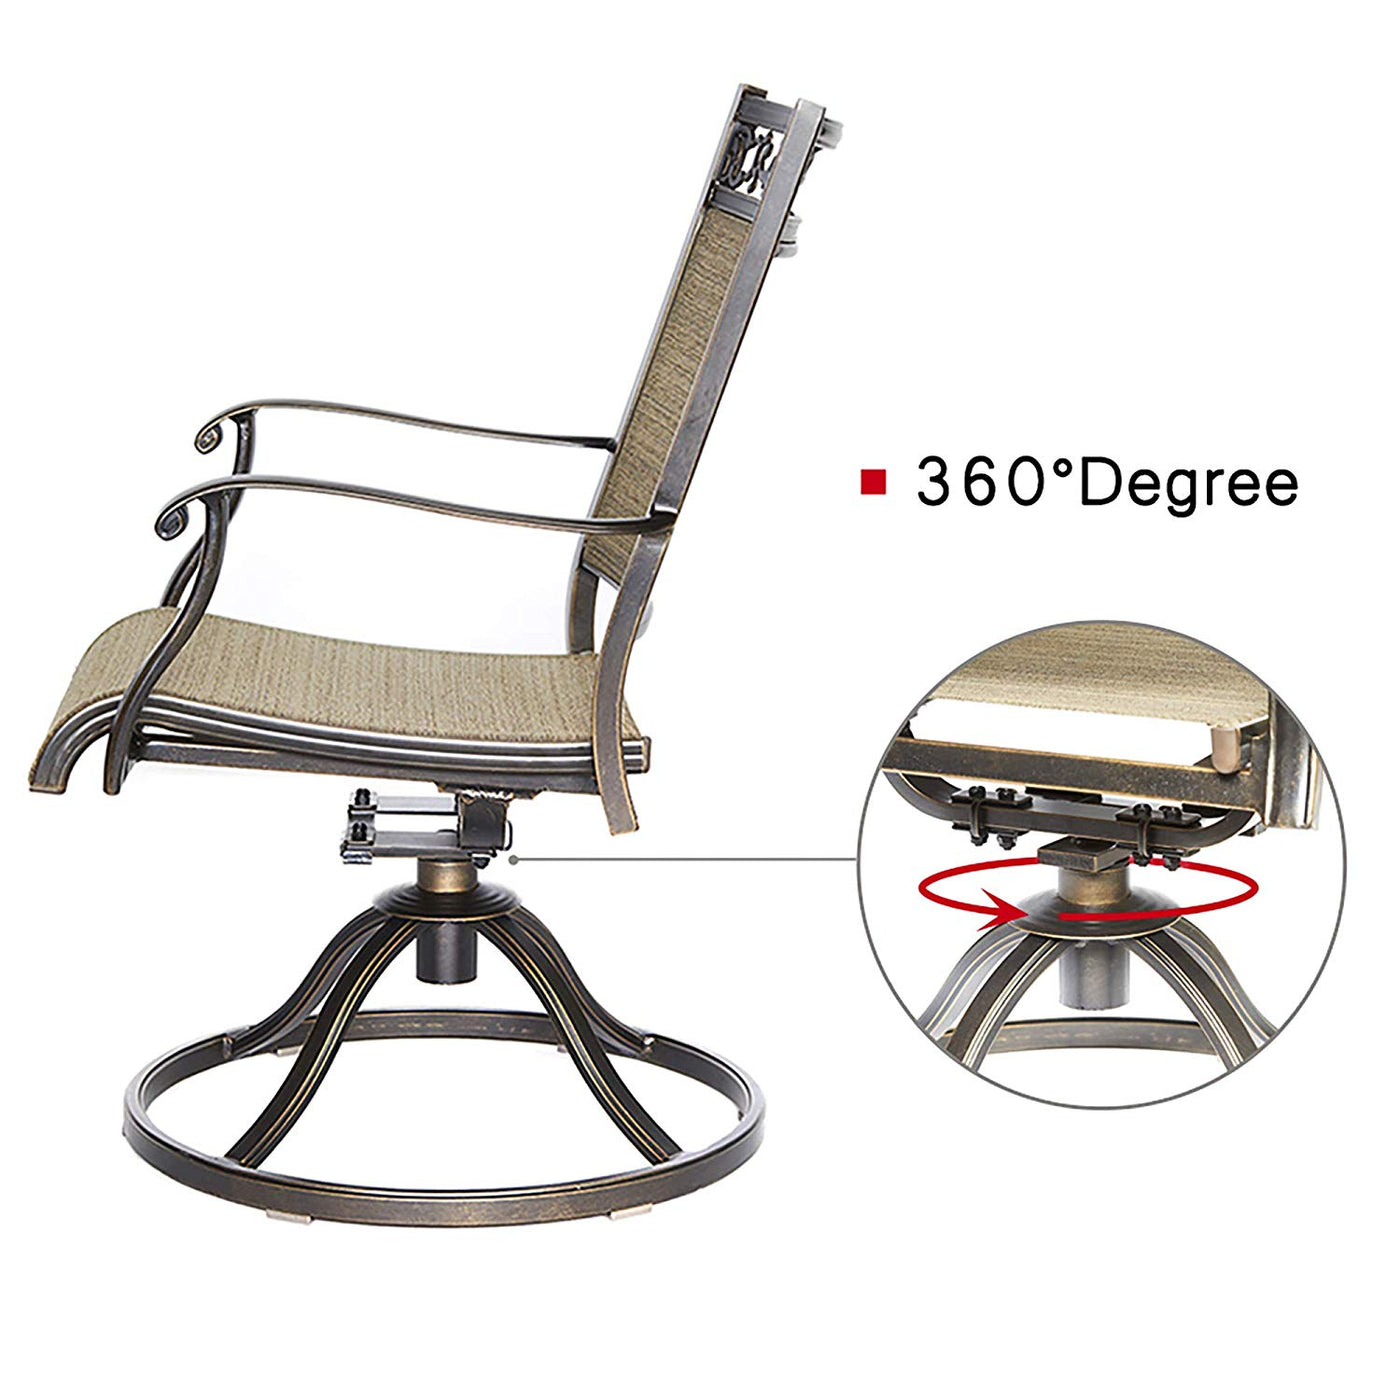 3 Piece Bistro Patio Table Chairs Set Aluminum Dining Table Swivel Rocker Chairs